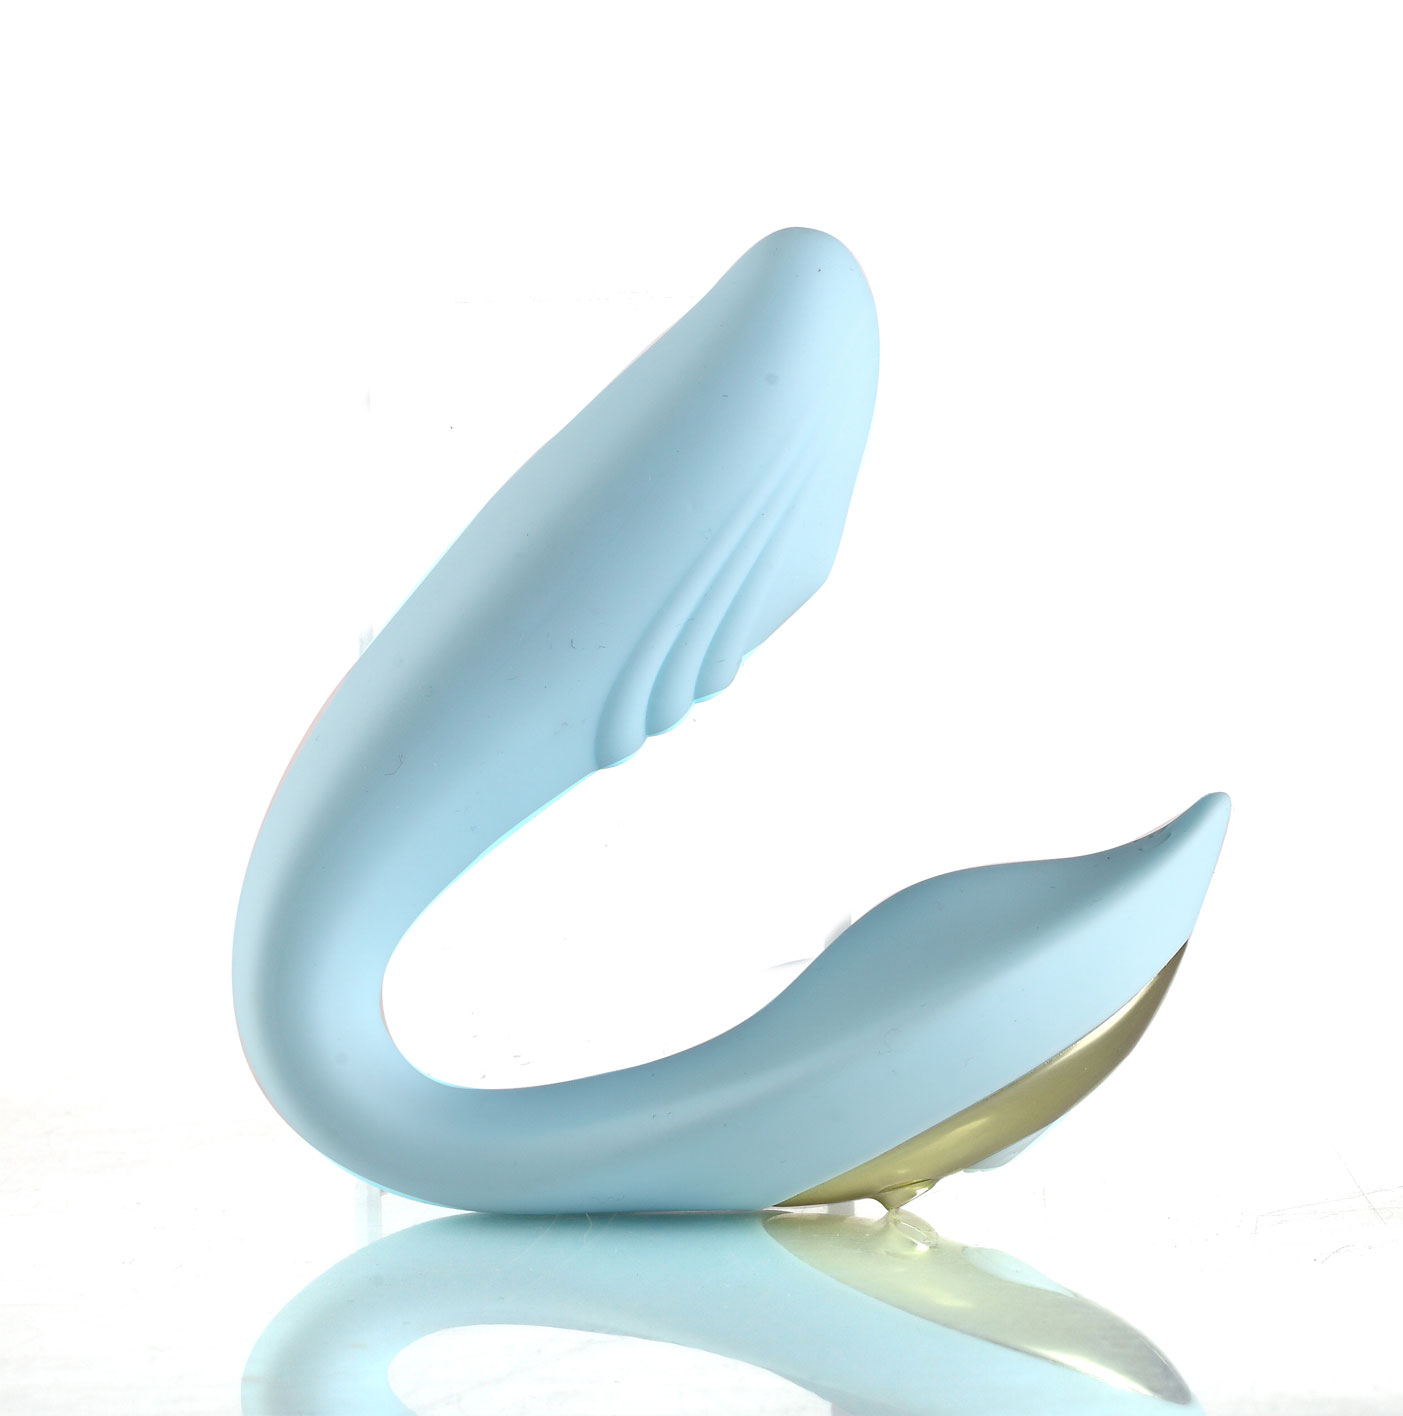 harmonie rechargeable remote silicone bendable  vibrator teal 